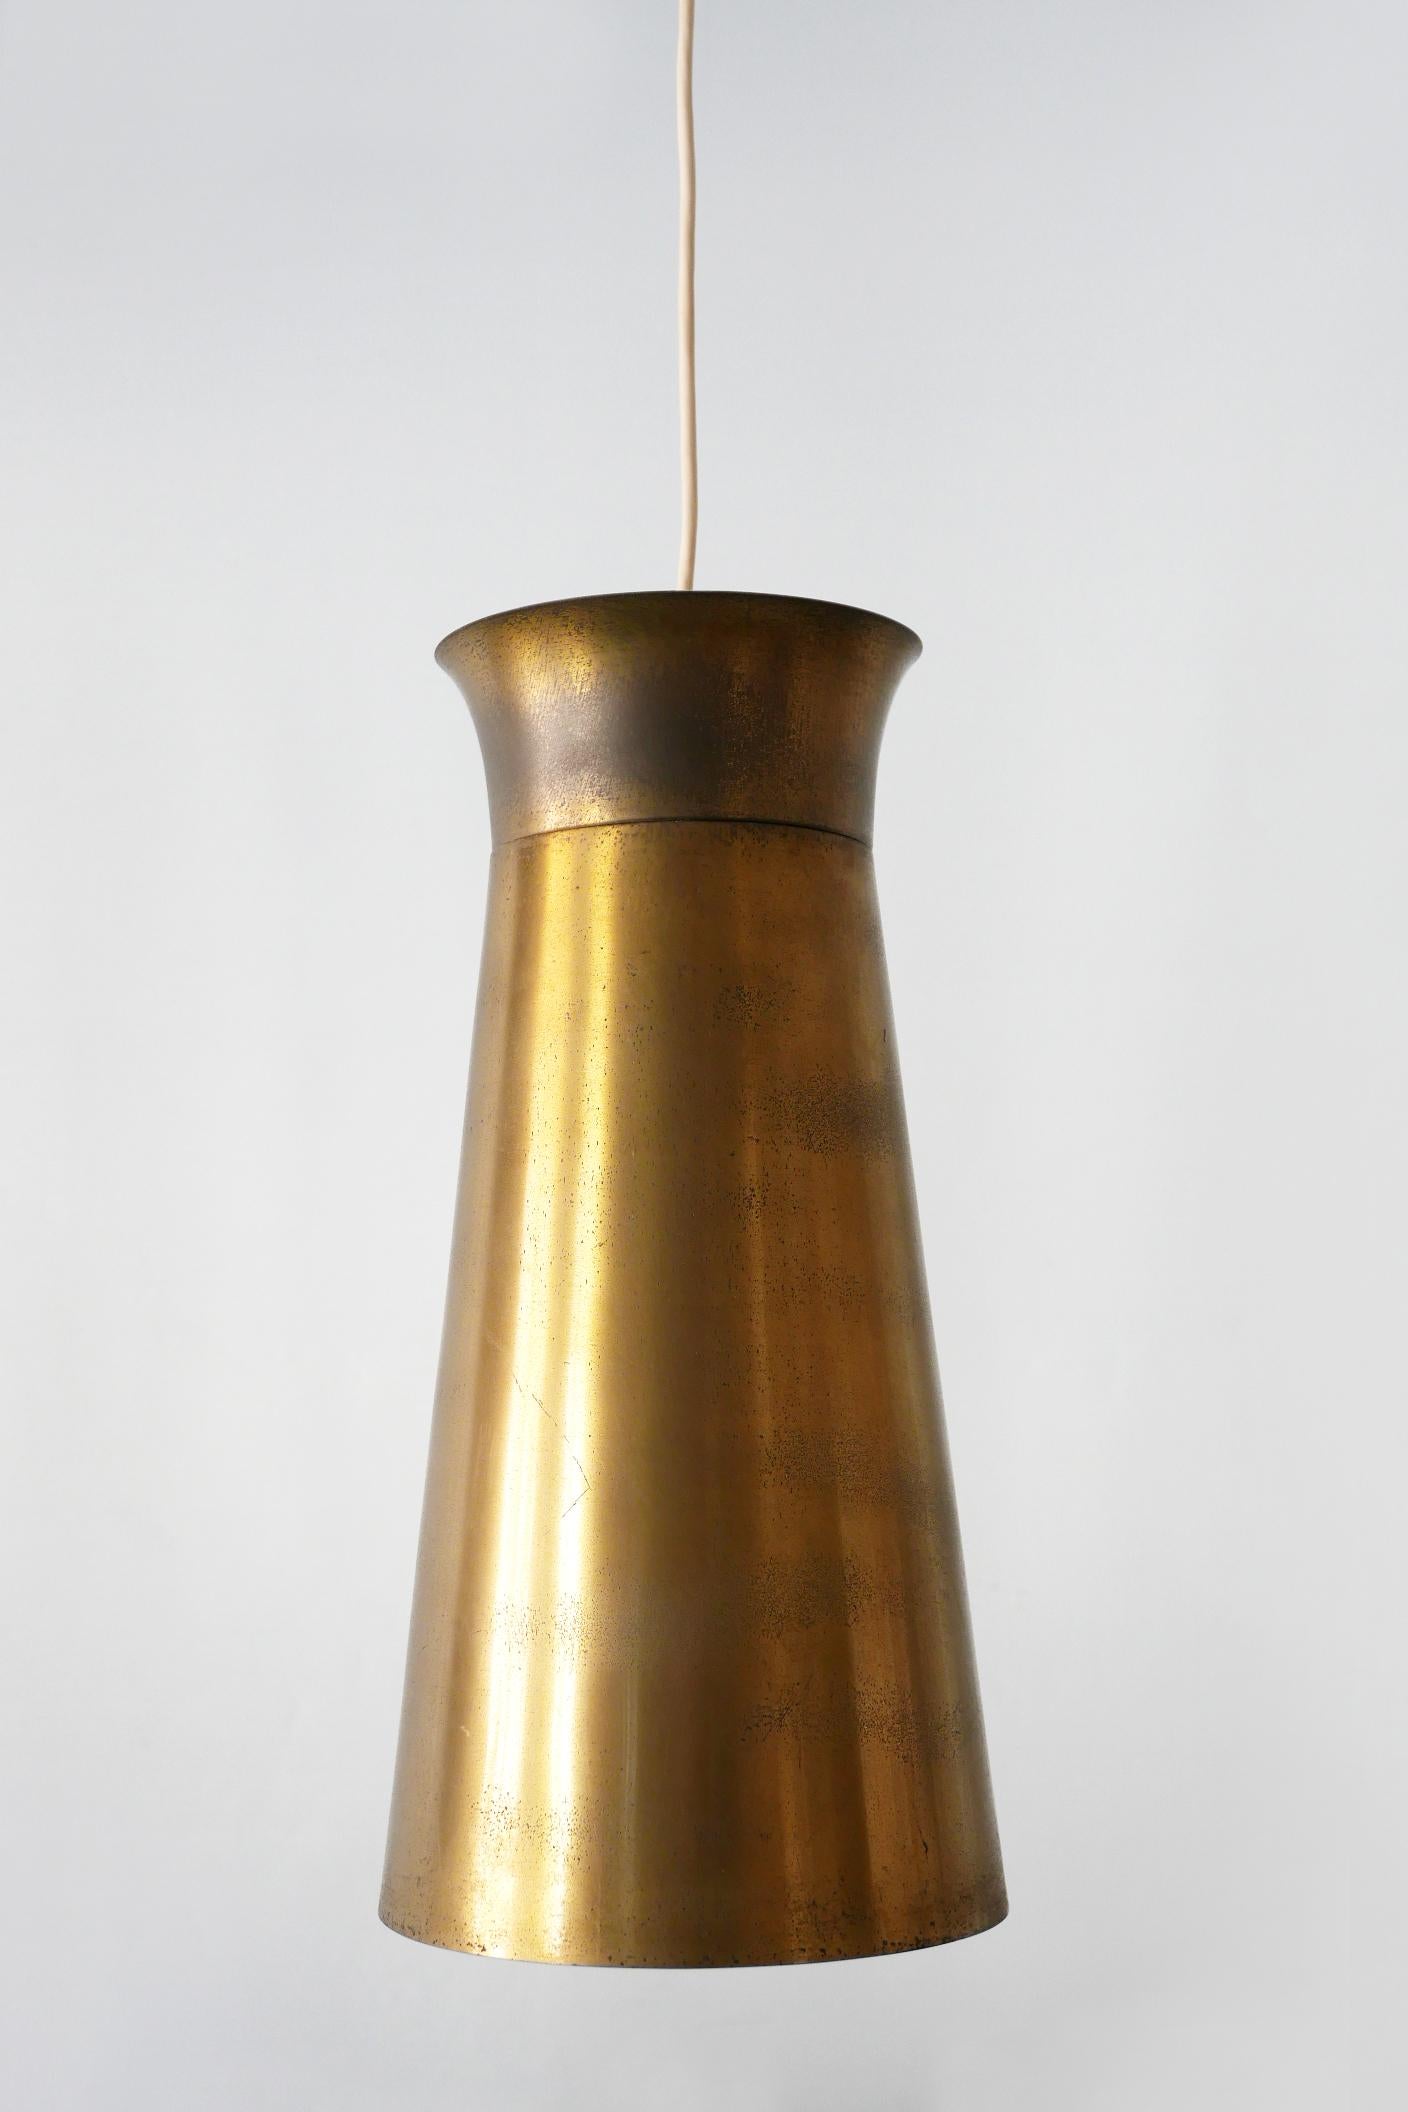 Elegant Mid-Century Modern Brass Pendant Lamps or Hanging Lights, 1950s, Germany For Sale 10